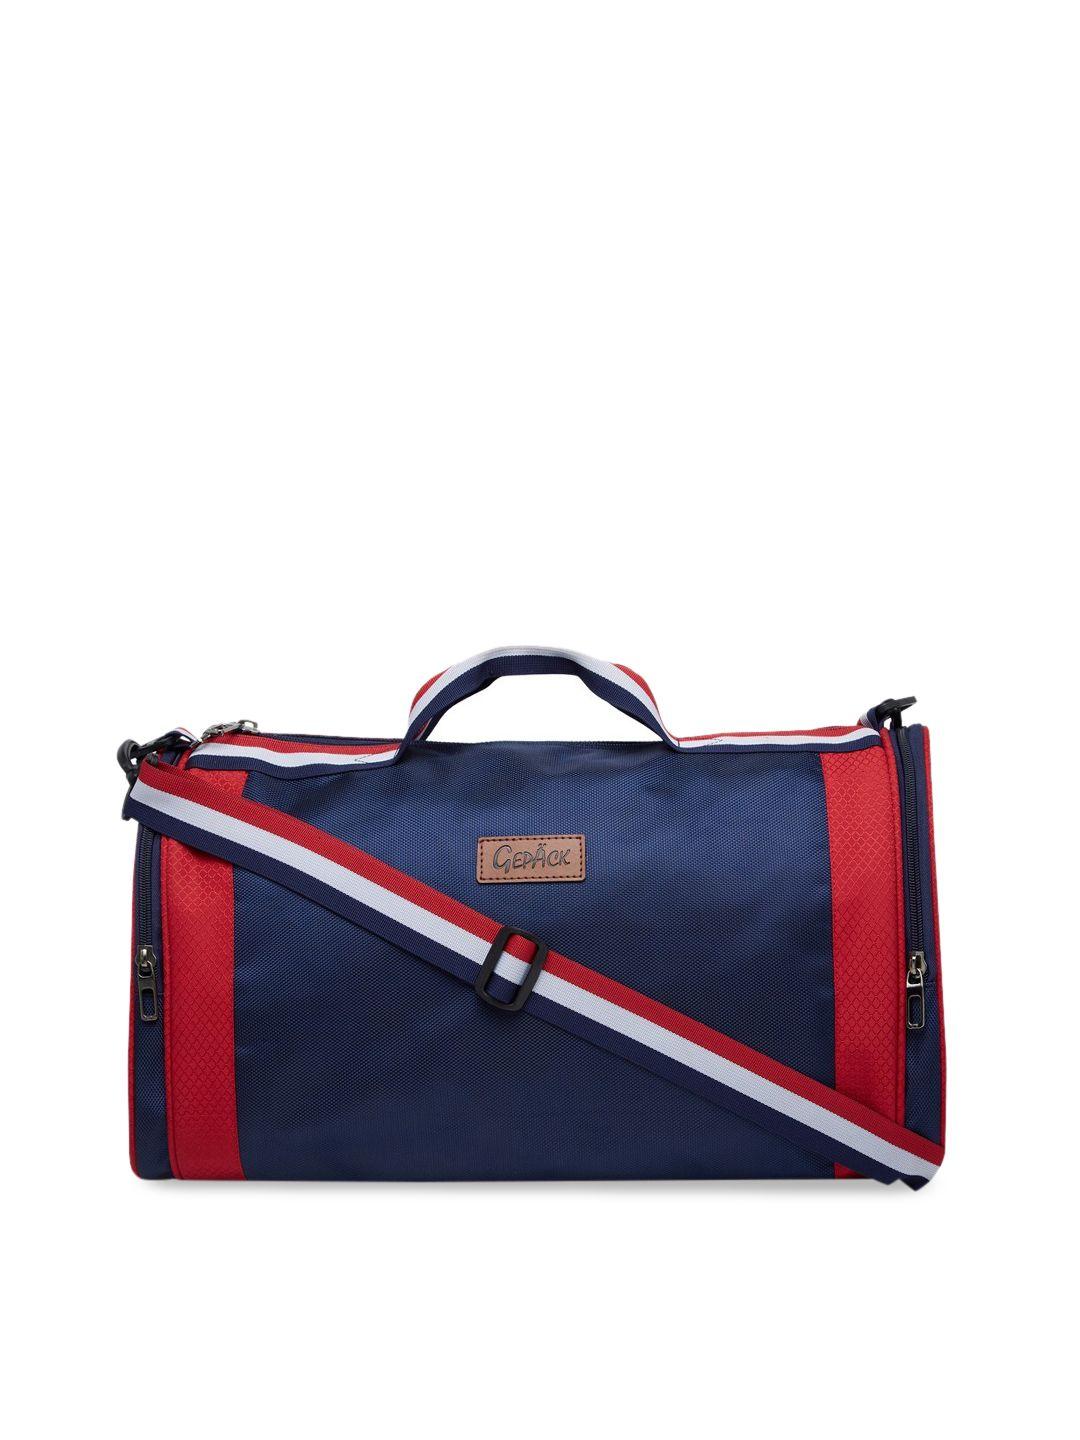 GEPACK by BagsRus Polyester 52 cms Navy Blue Duffel Travel Bag